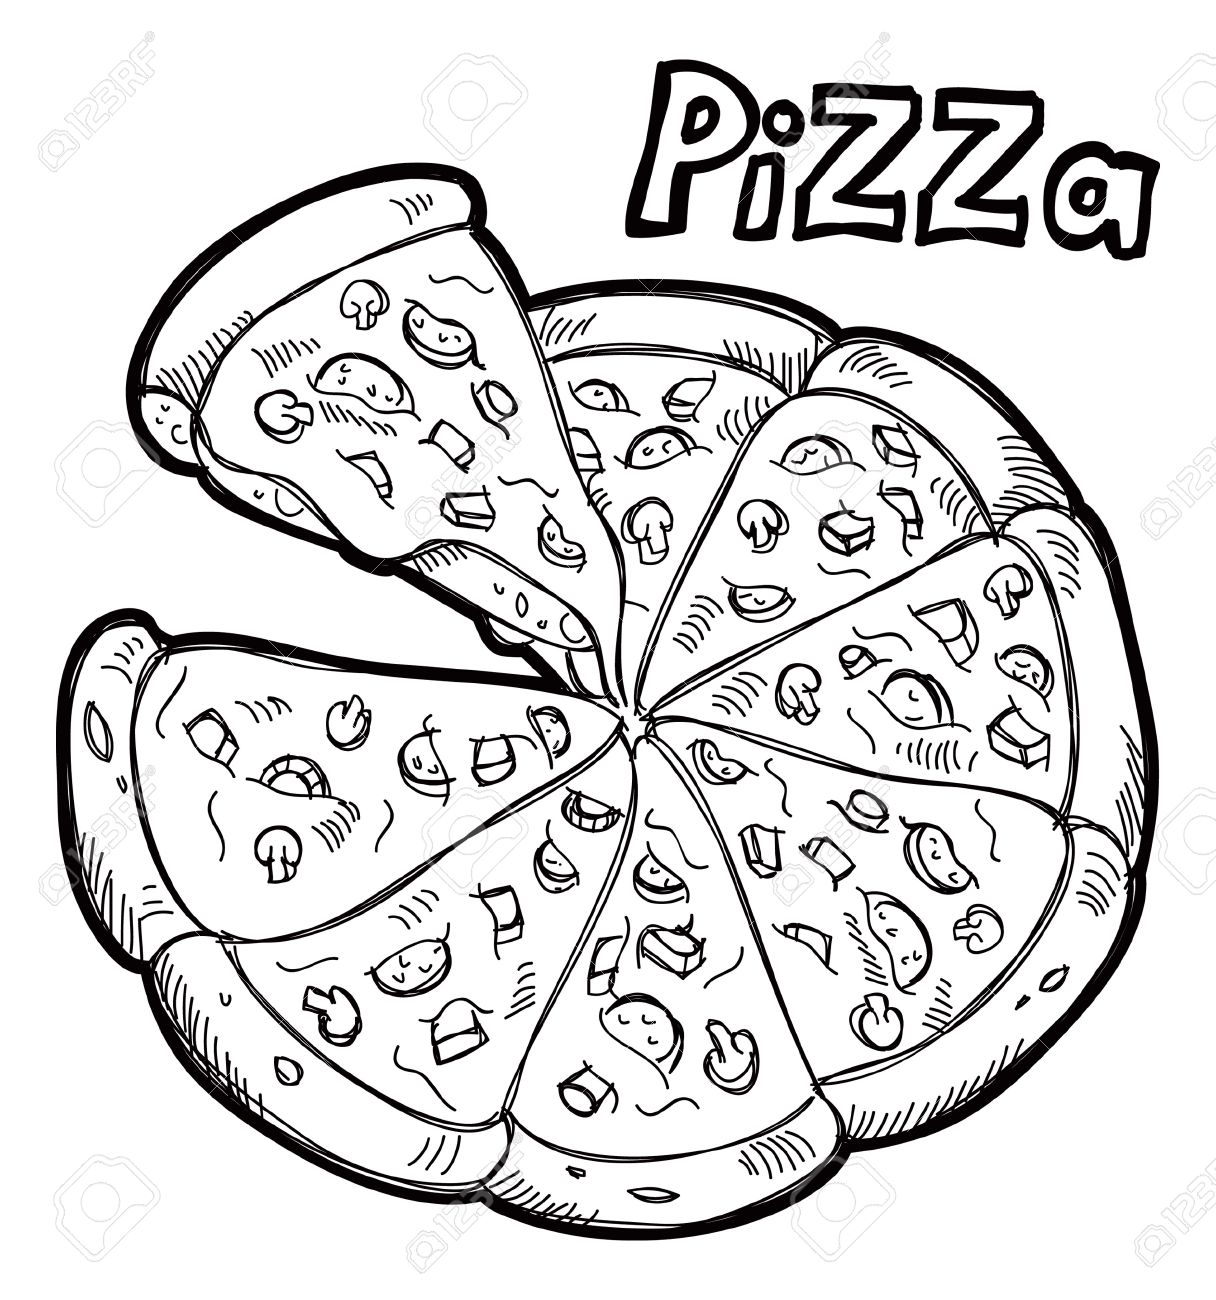 Best Pizza Clipart Black And White #6397.